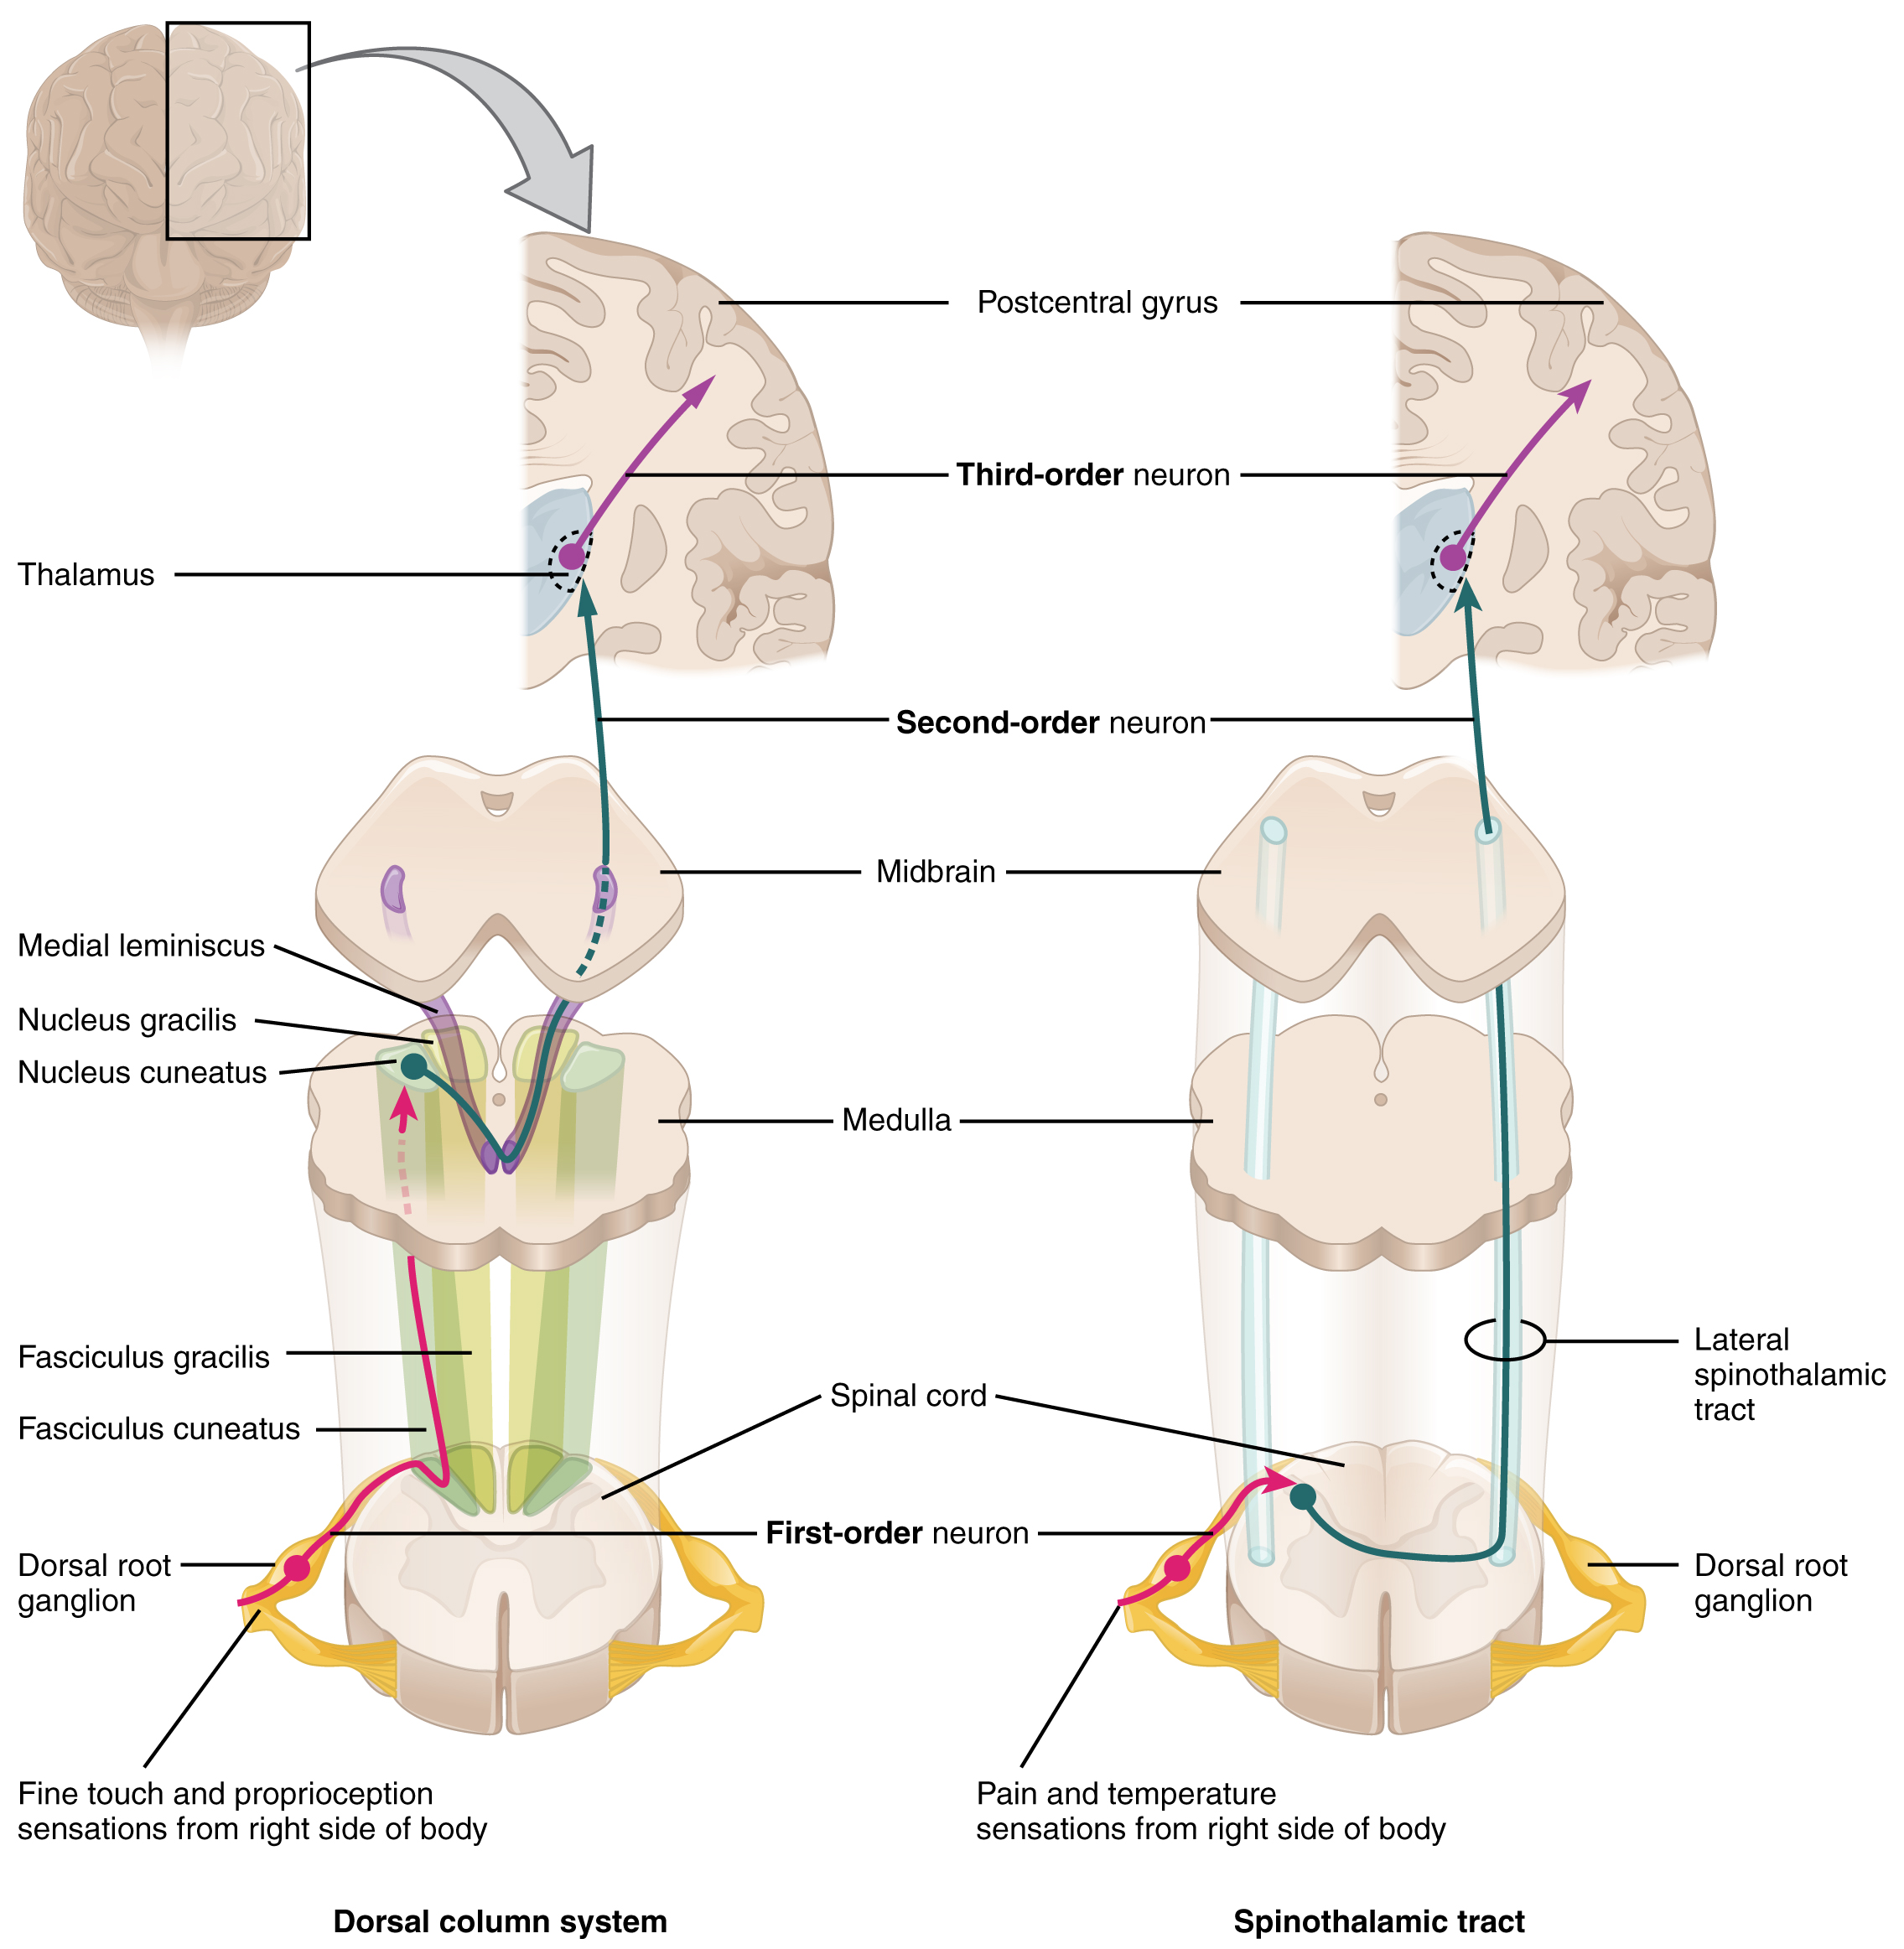 The left panel shows the dorsal column system and its connection to the brain. The right column shows the spinothalamic tract and its connection to the brain.